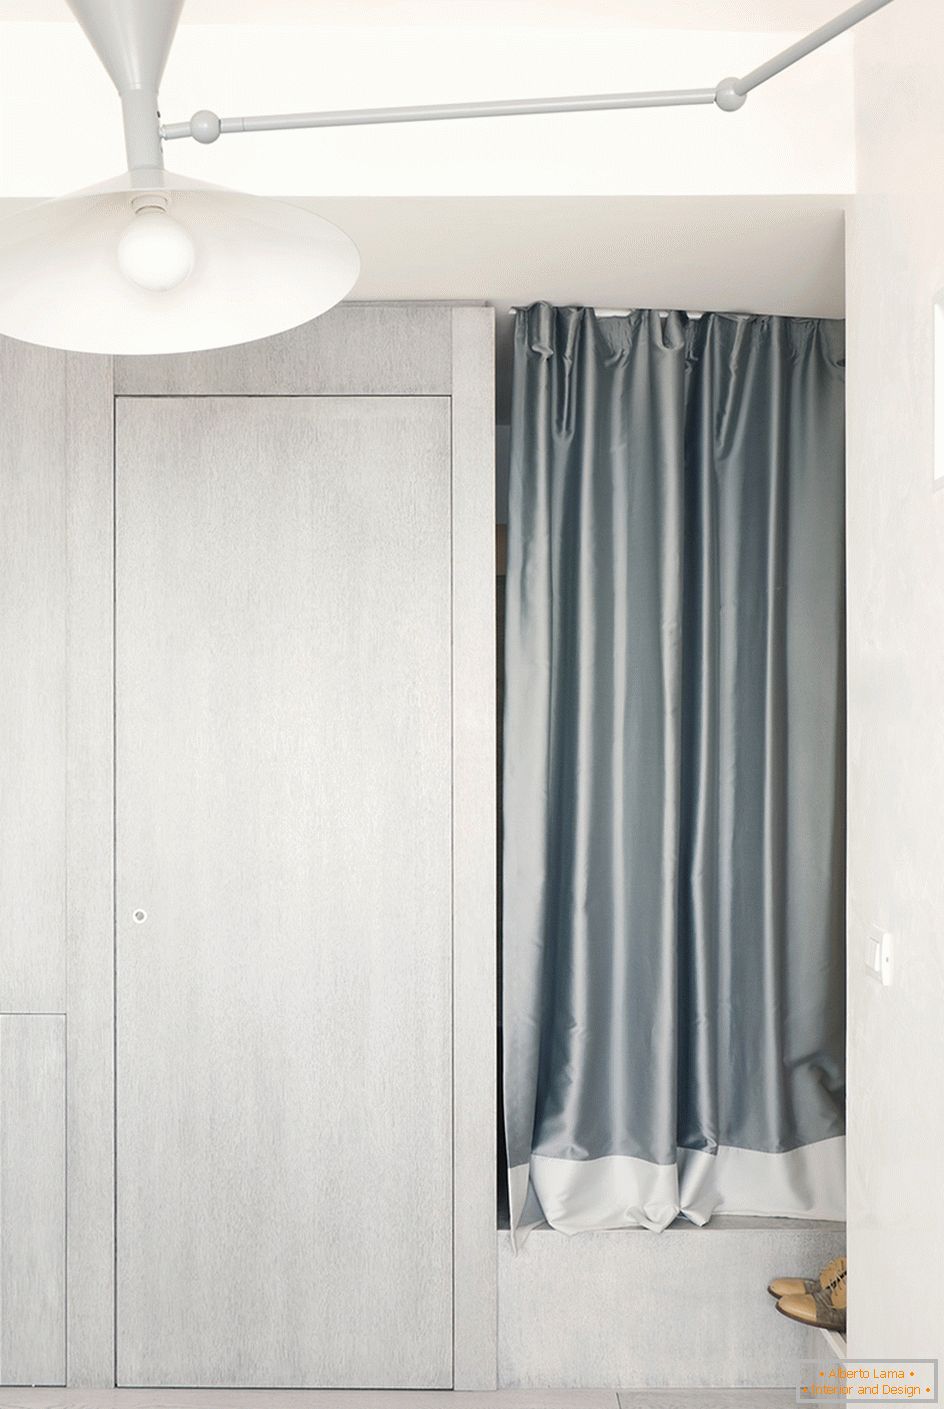 Children behind the curtain in a small studio apartment